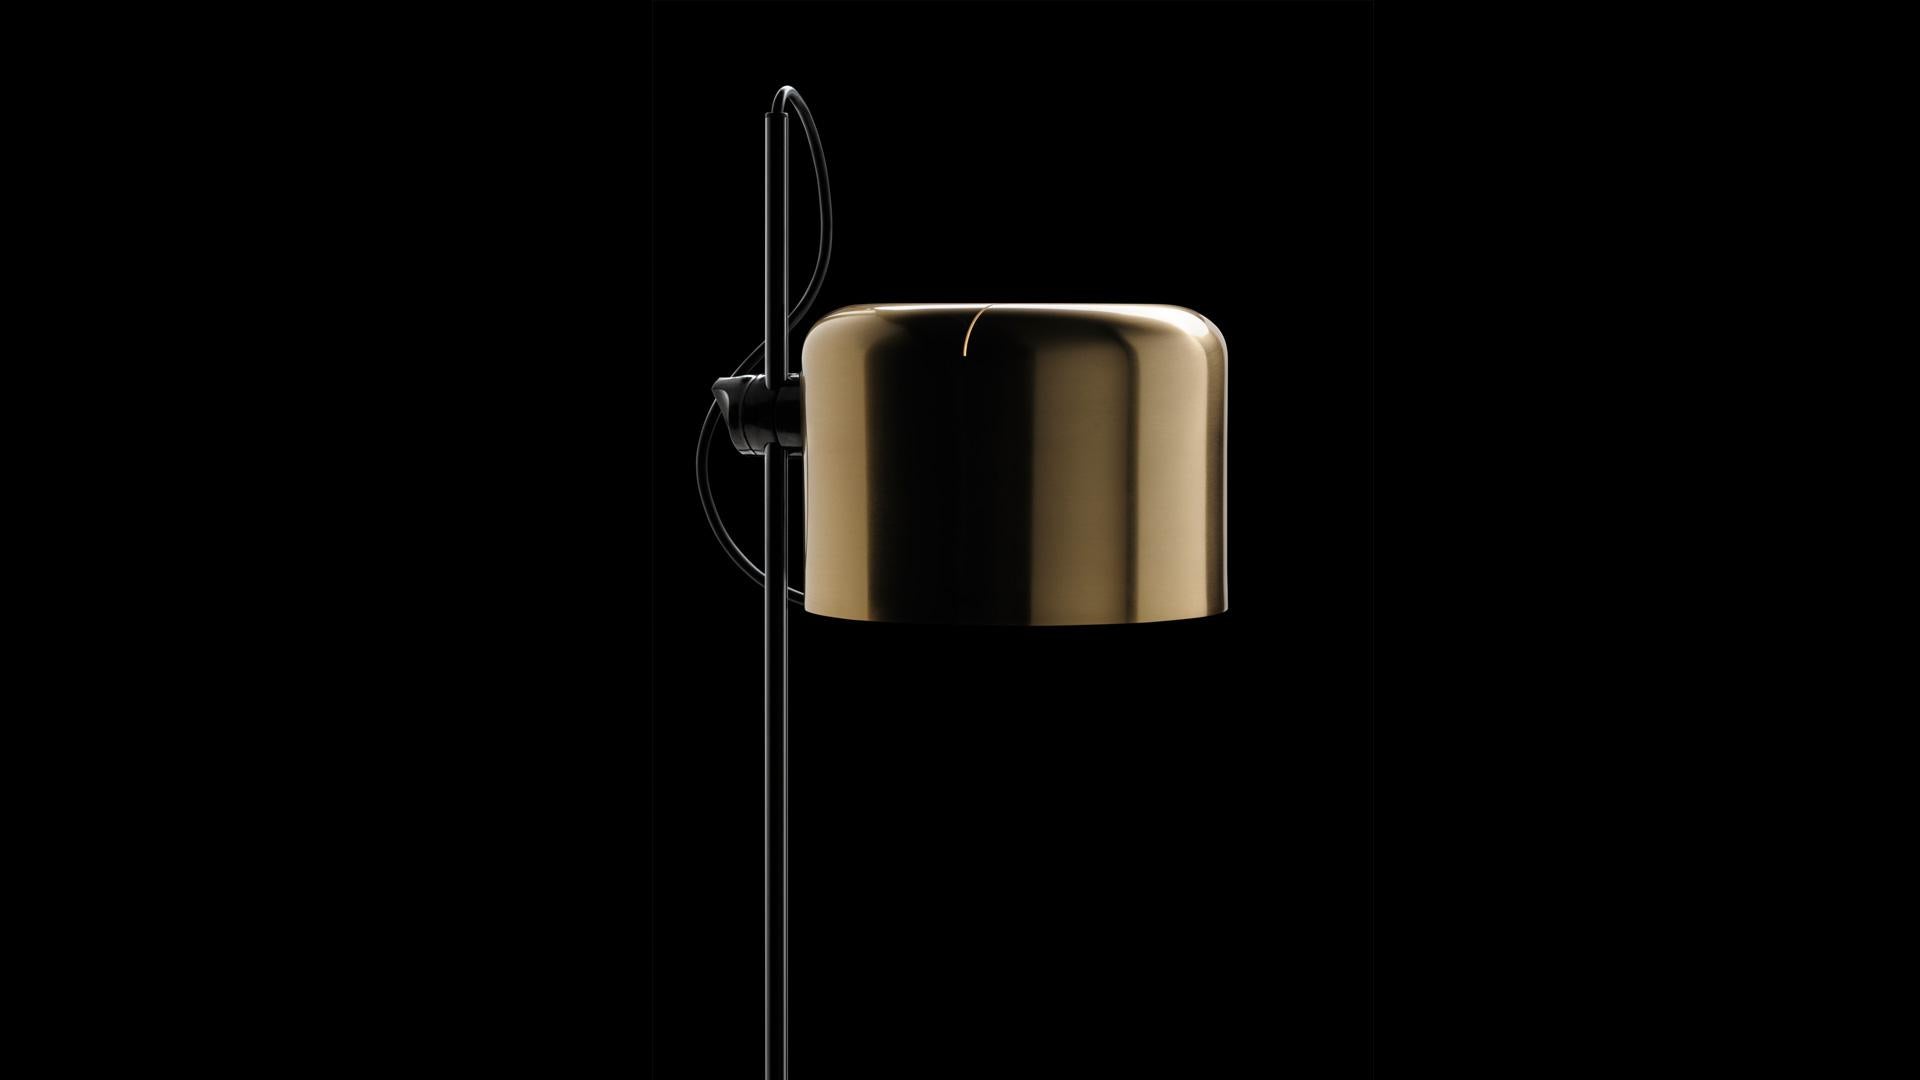 Modern Golden Anniversary Coupé Lamp, Limited Edition of 500 Numbered Pieces